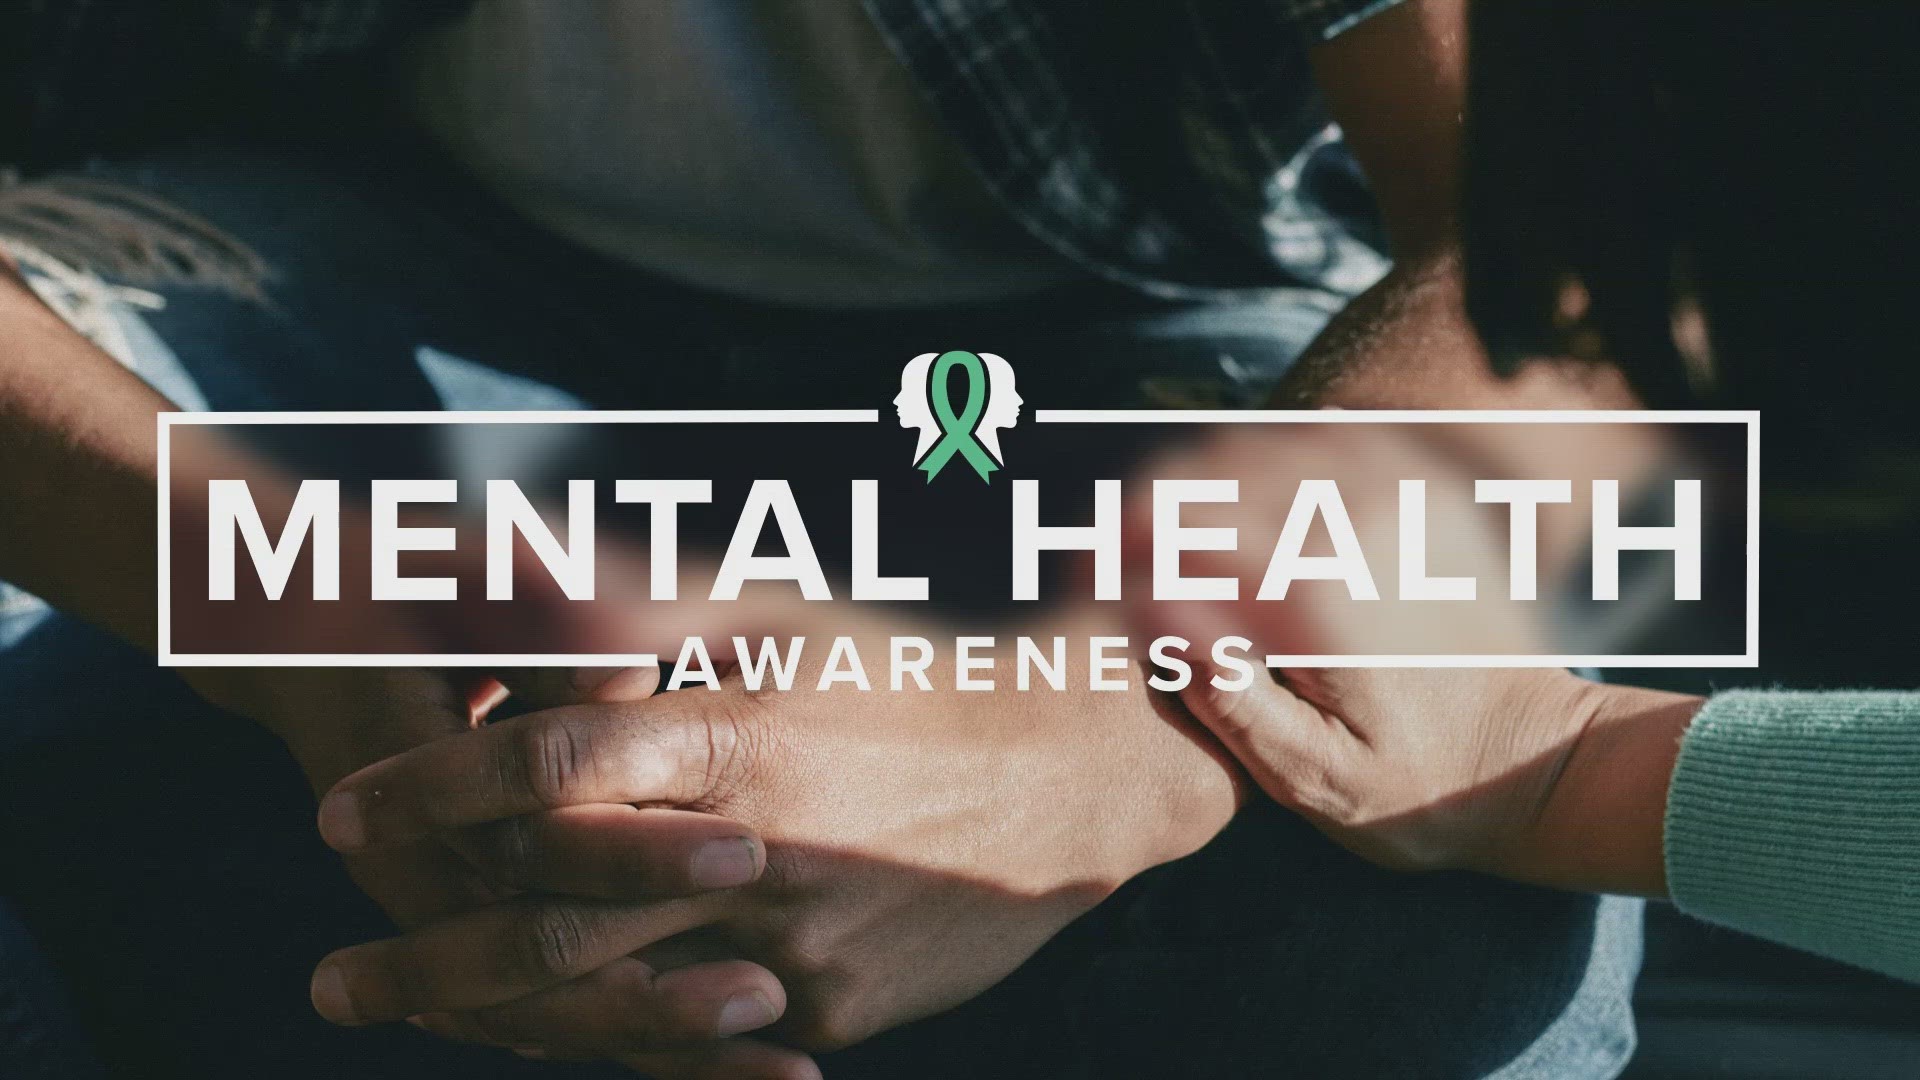 May 1 marks the start of Mental Health Awareness Month. More than one in five Americans live with a mental illness and 55% of those people receive no treatment.